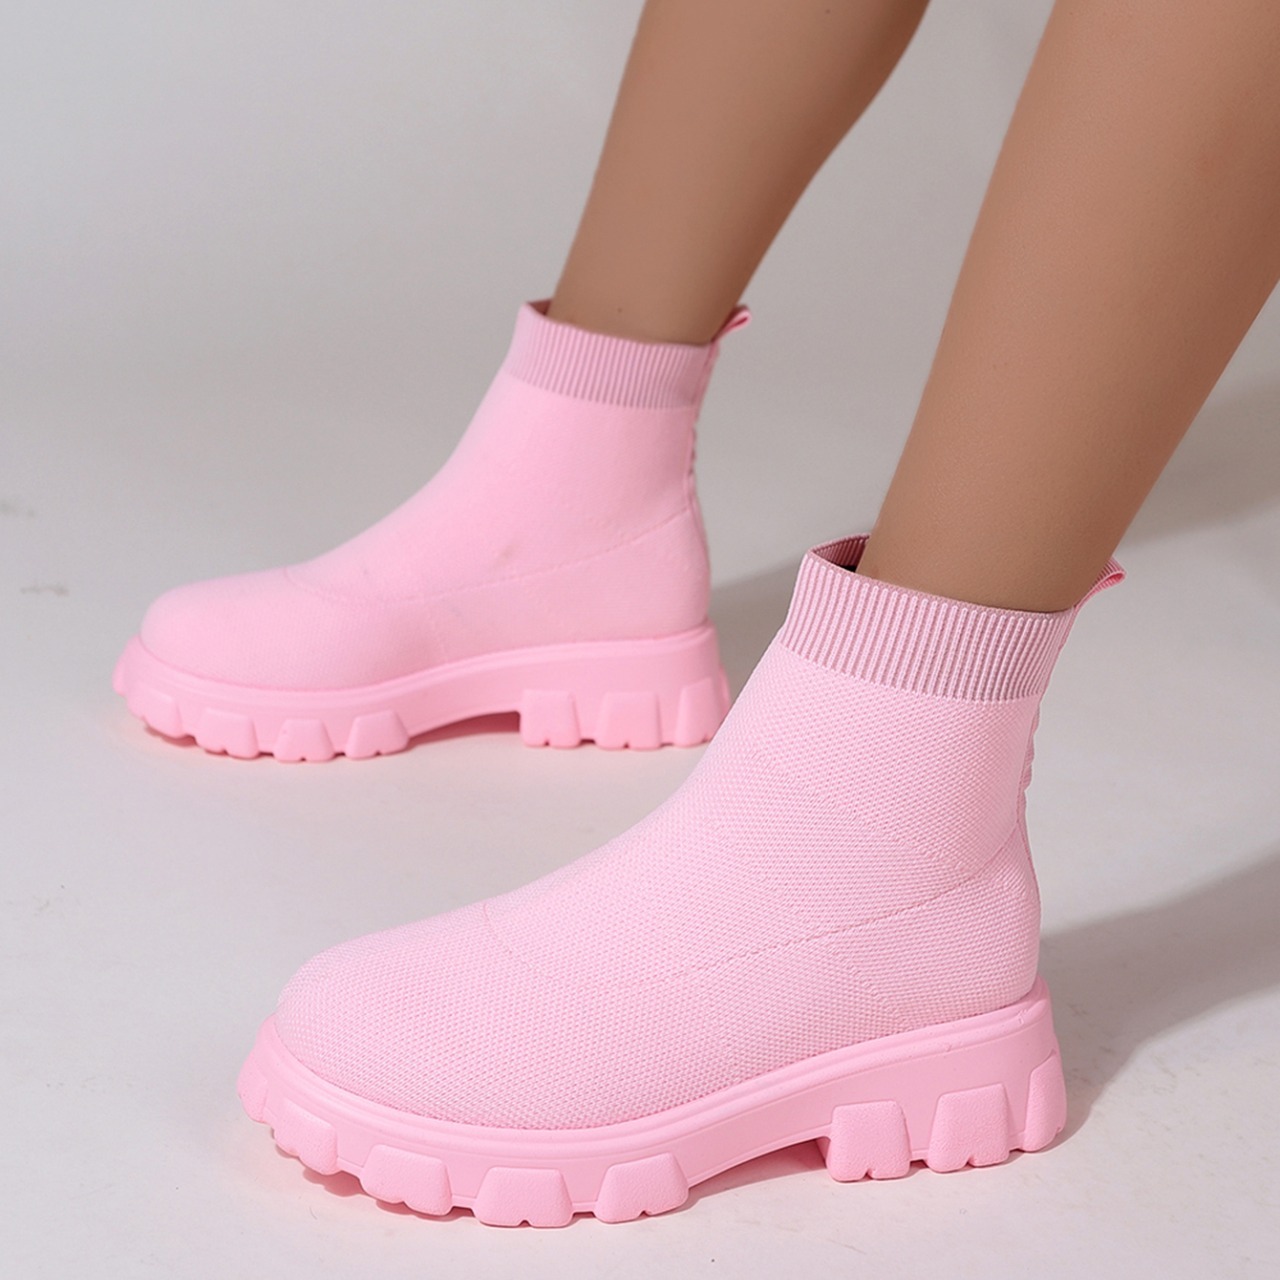  Women's Platform Ankle Sock Boots Round Toe Chunky Sole Heel  Fall Winter Color Block Stretch Knit Slip On Short Booties Shoes :  Clothing, Shoes & Jewelry